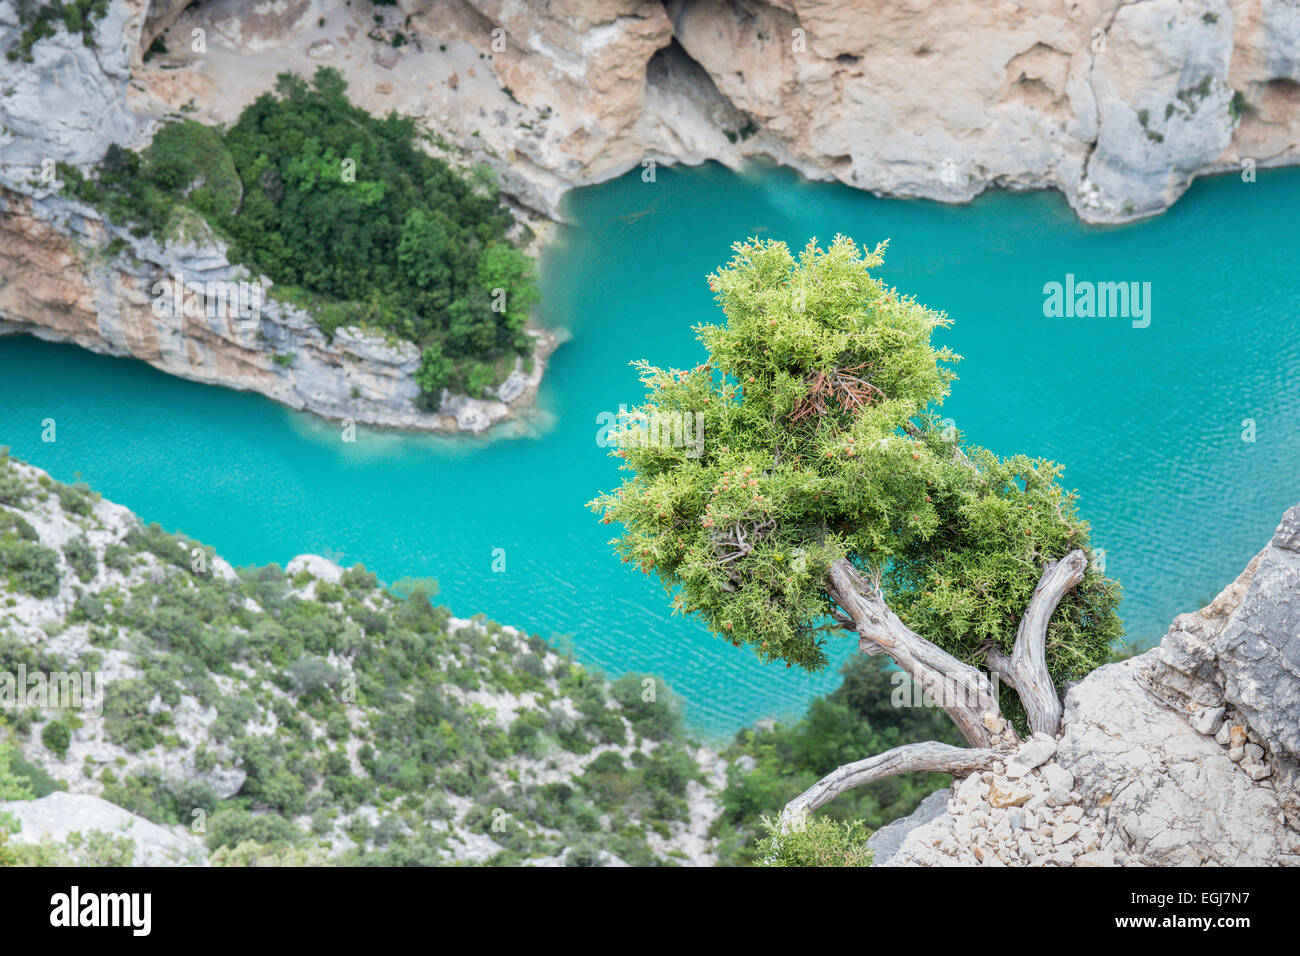 GORGE DU VERDON, FRANCE - MAY 11, 2014: A view of the Gorge du Verdon (Verdon Gorge) in southern France. Stock Photo